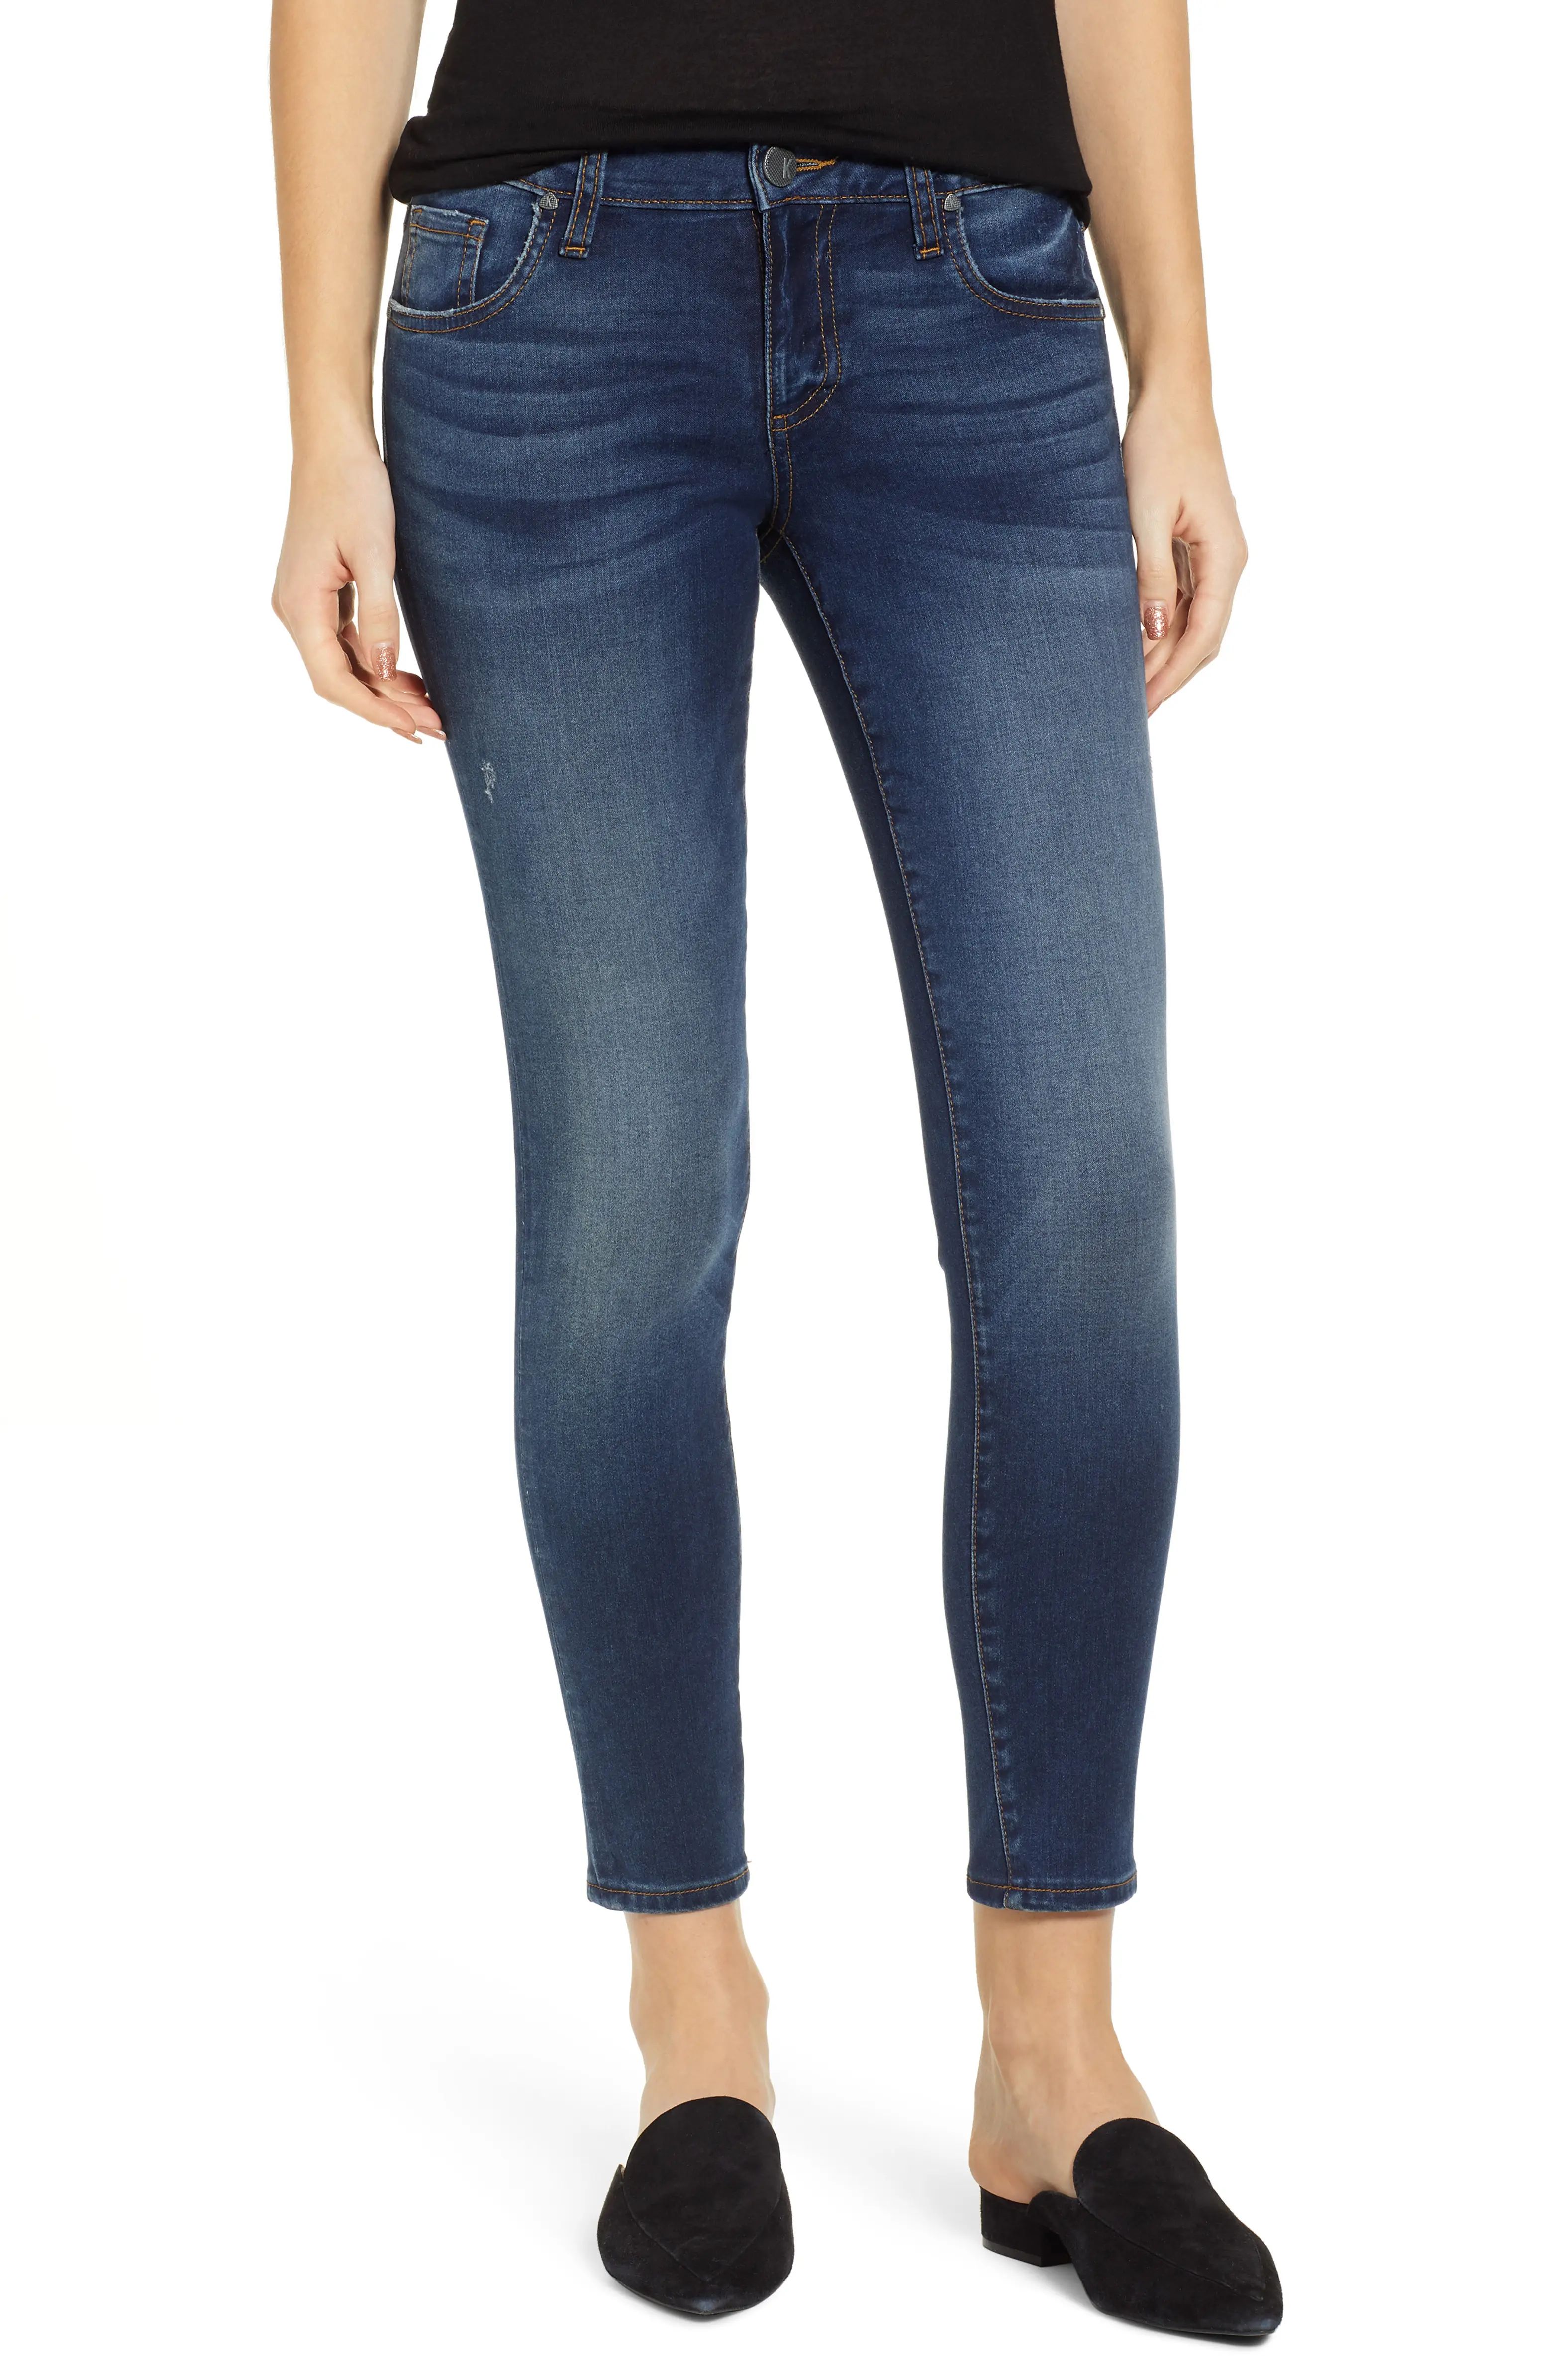 KUT From The Koth Donna Ankle Skinny Jeans | Nordstrom